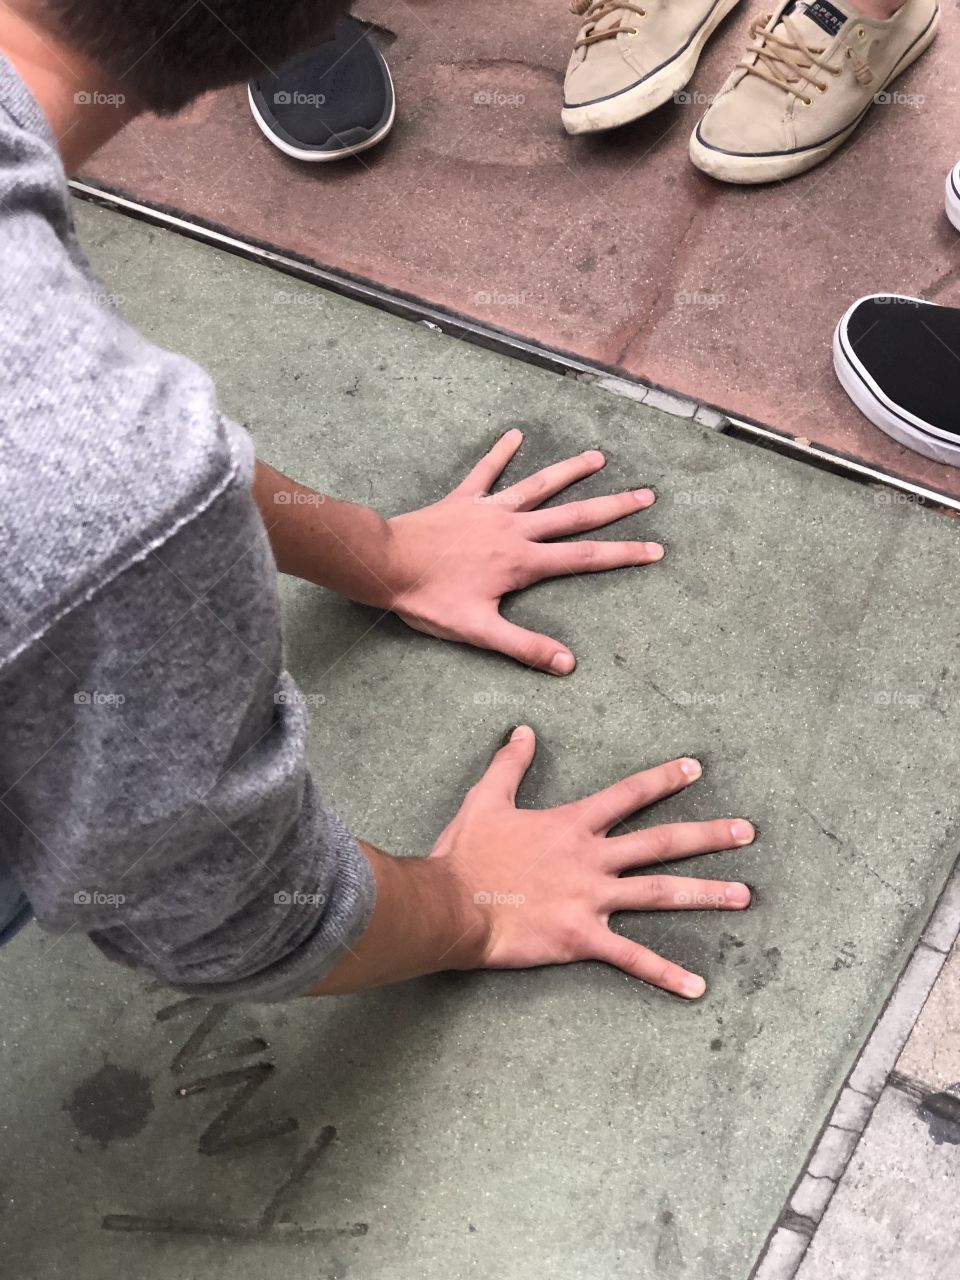 The Hollywood Walk of fame, and its corresponding hands- somehow my classmates hands fit perfectly.